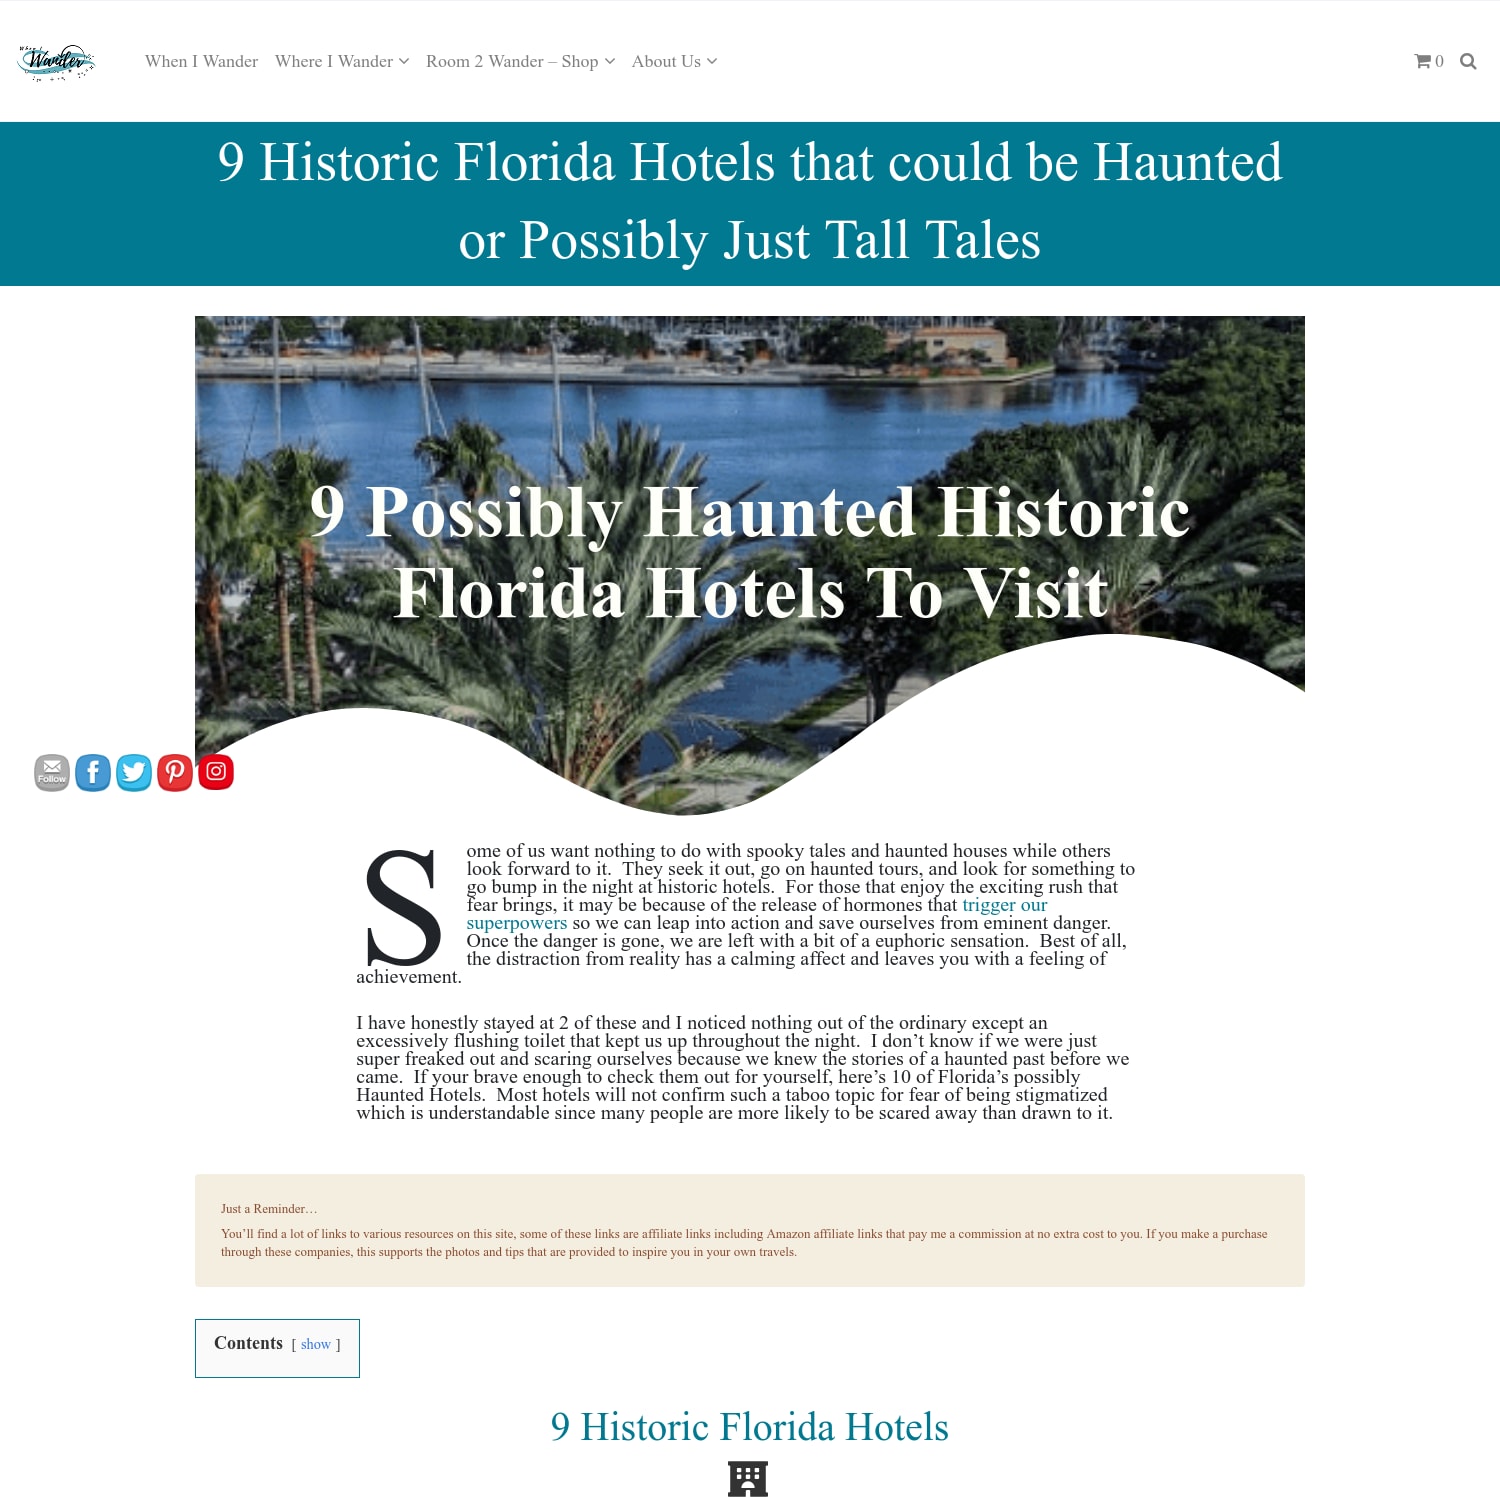 9 Historic Florida Hotels - Haunted or Just Tall Tales